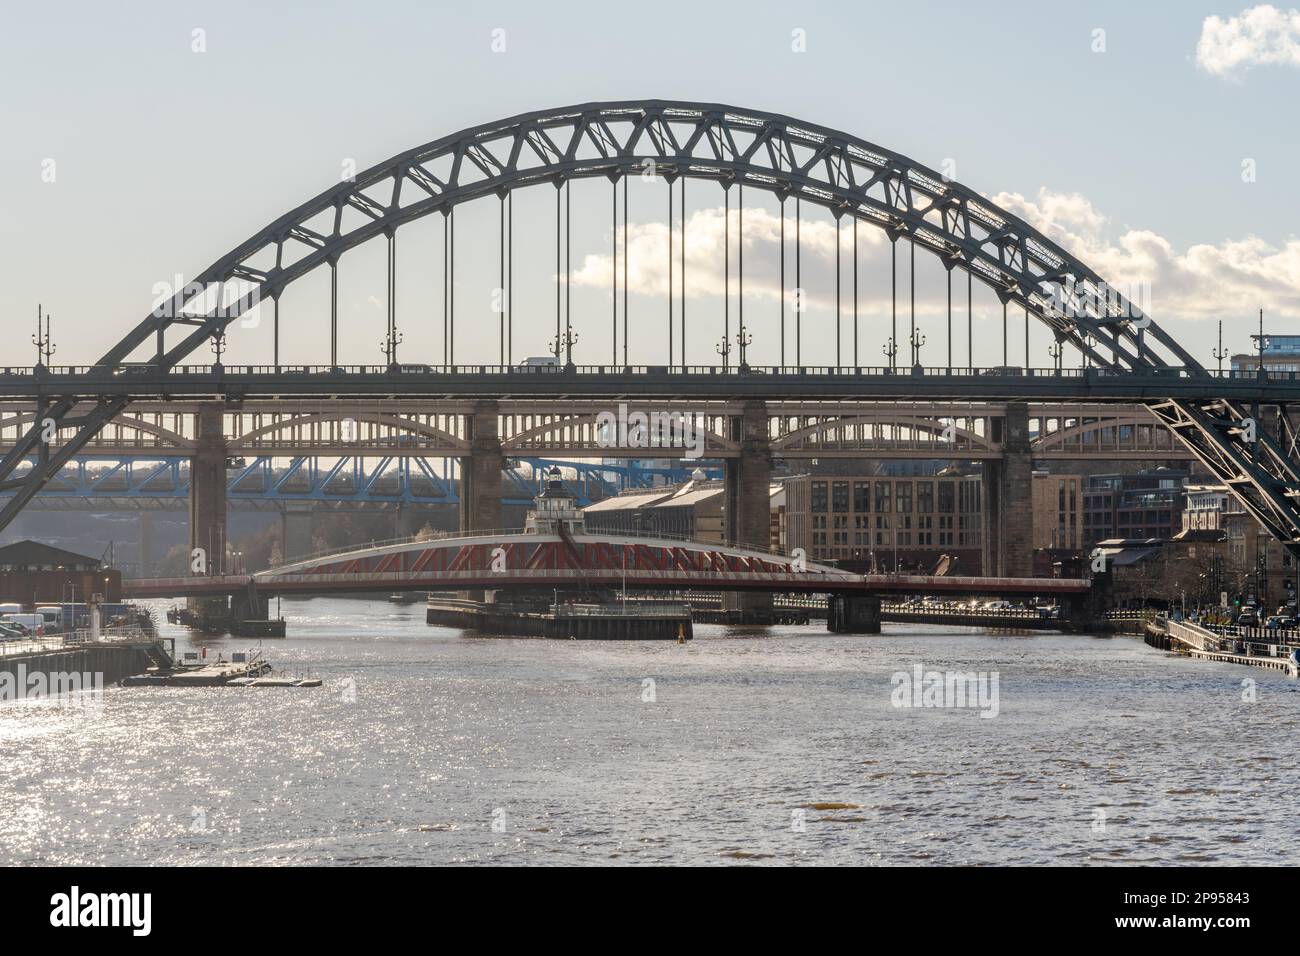 View of the Tyne Bridge crossing the river to Gateshead, with the Swing, High Level and Queen Elizabeth II bridges aligned. Newcastle upon Tyne, UK. Stock Photo